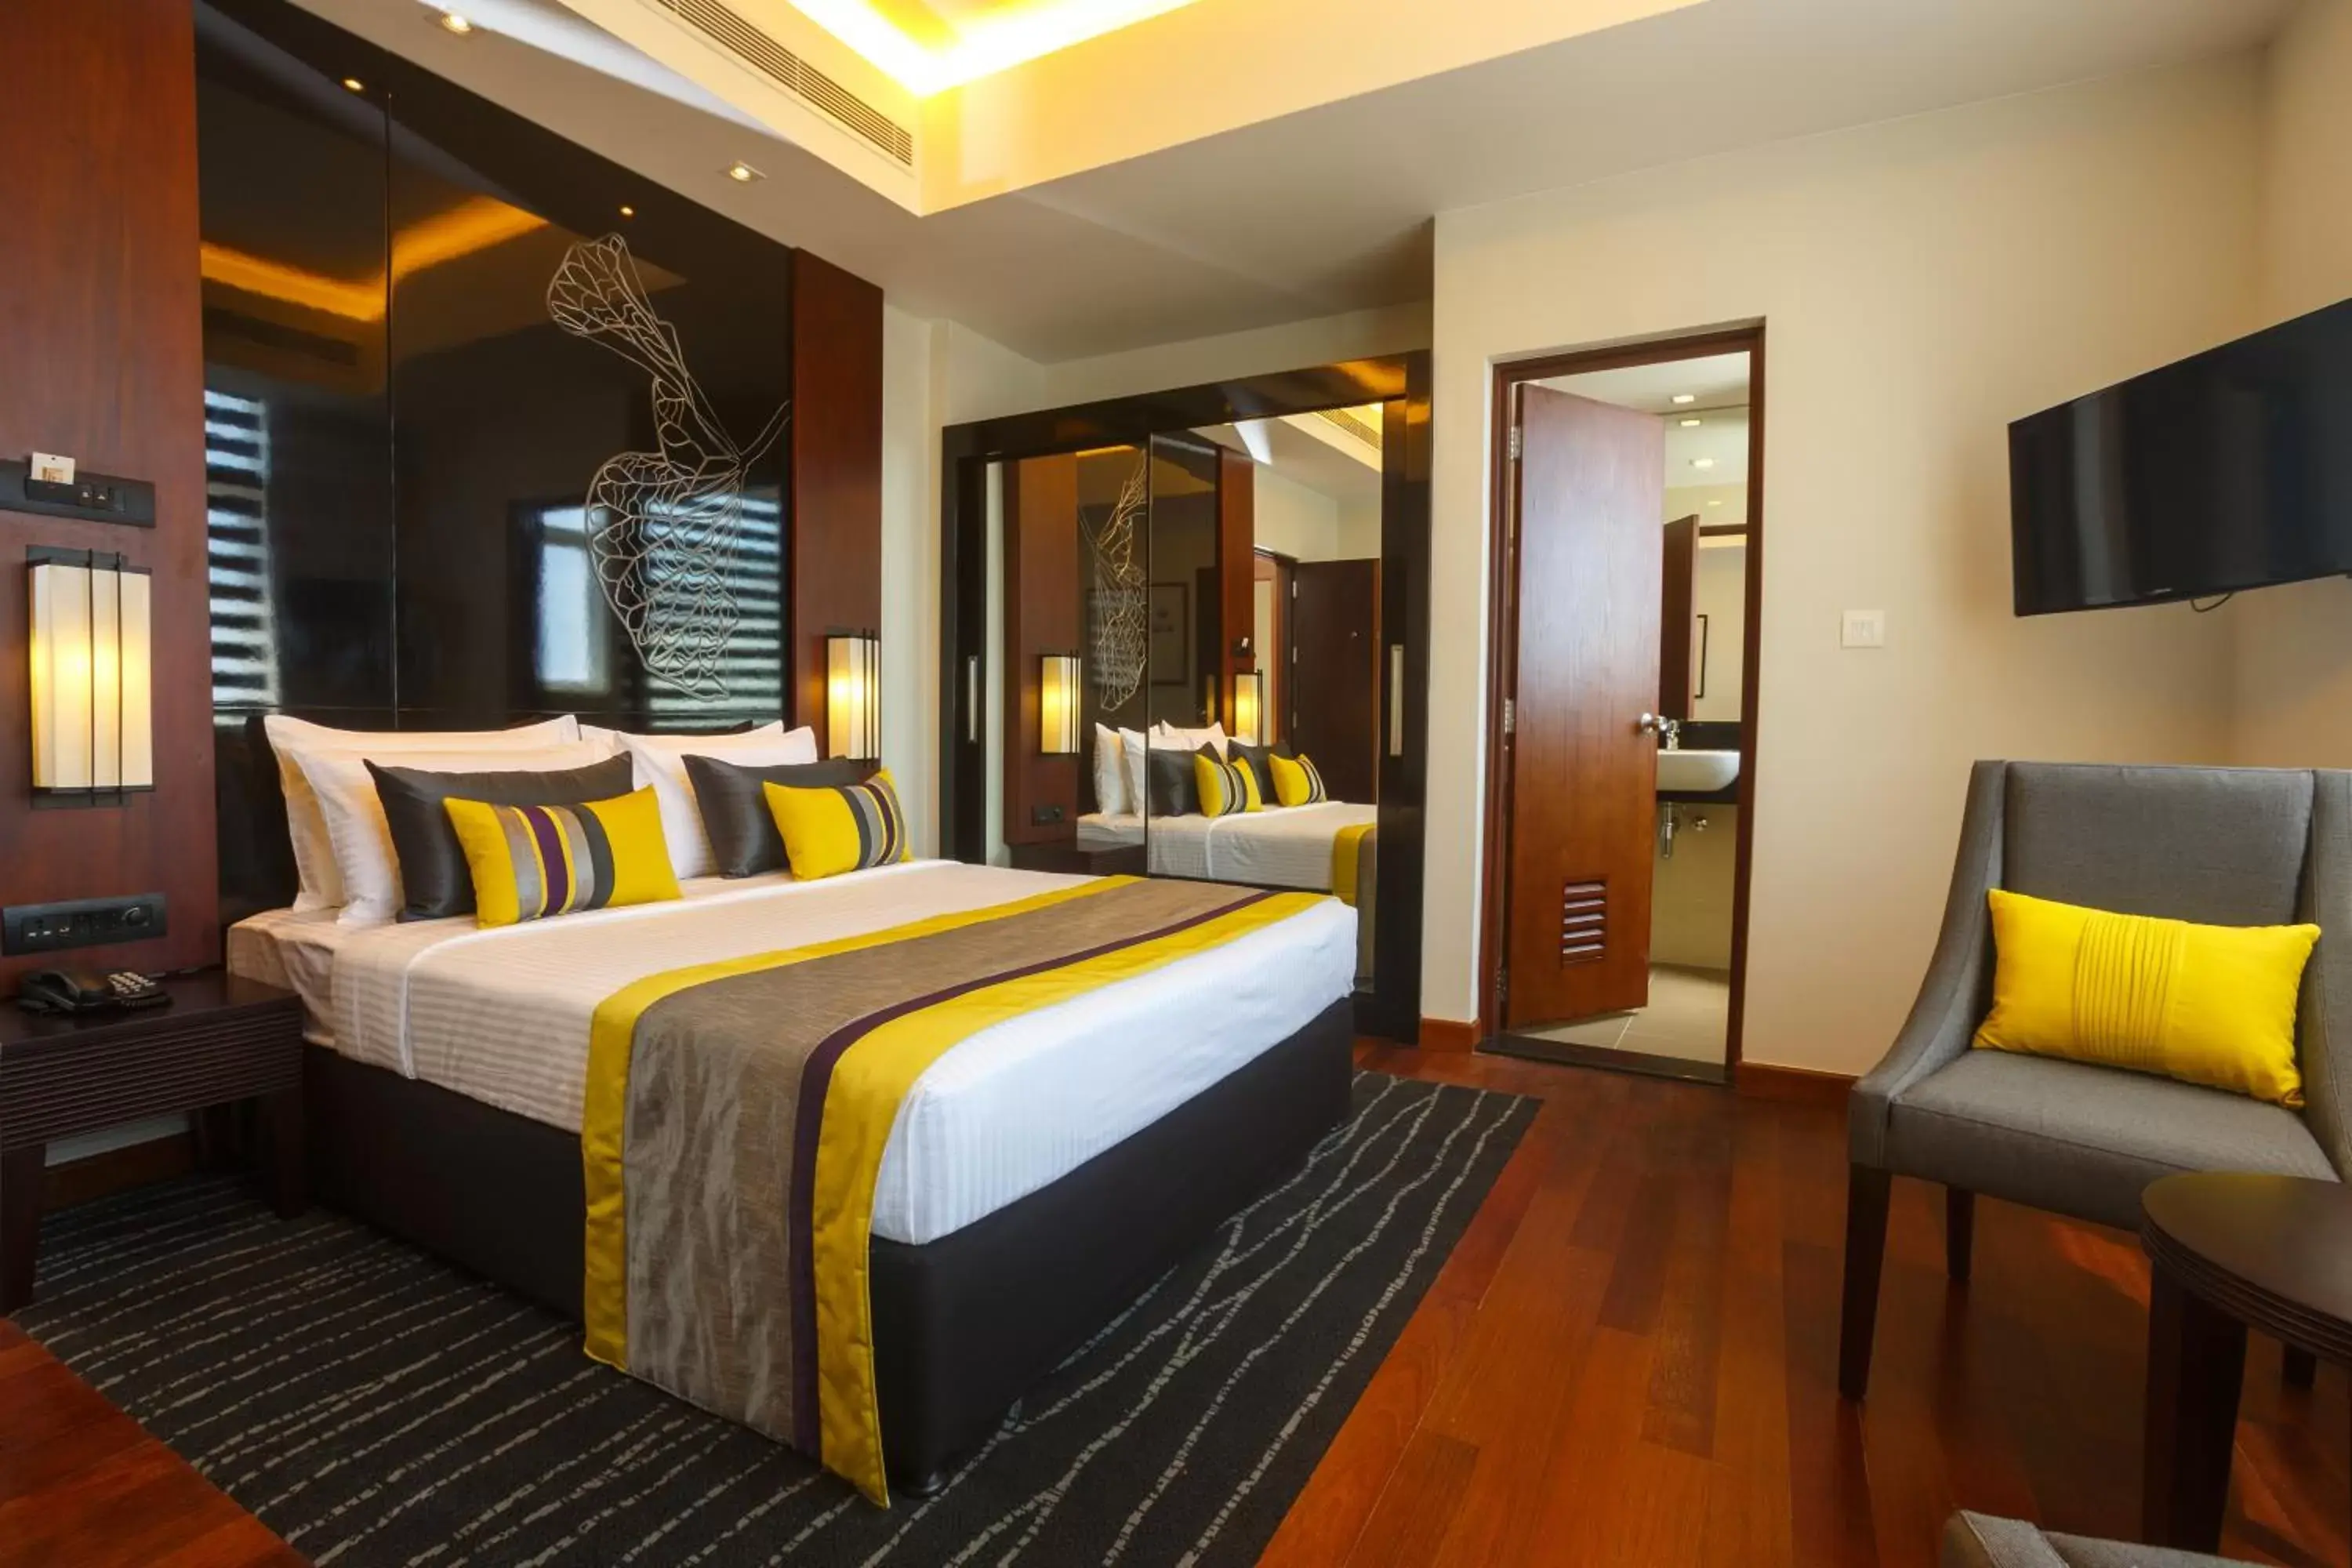 Deluxe Double or Twin Room with free late check-out until 4.00 pm and early check in from 10.00 am in Renuka City Hotel